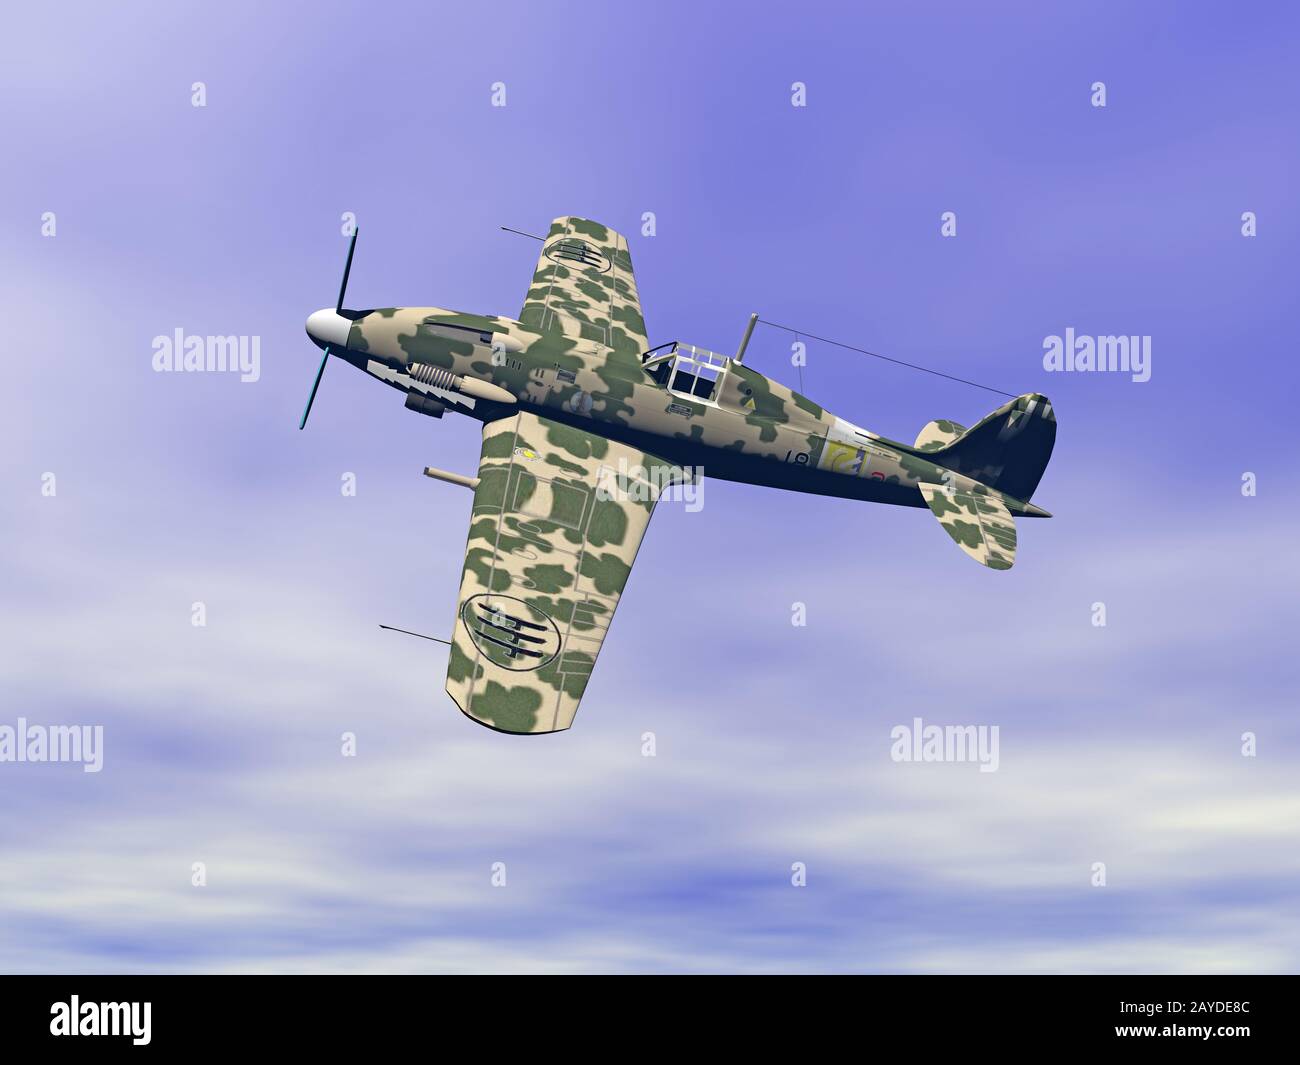 Airplane in the sky with camouflage paint Stock Photo